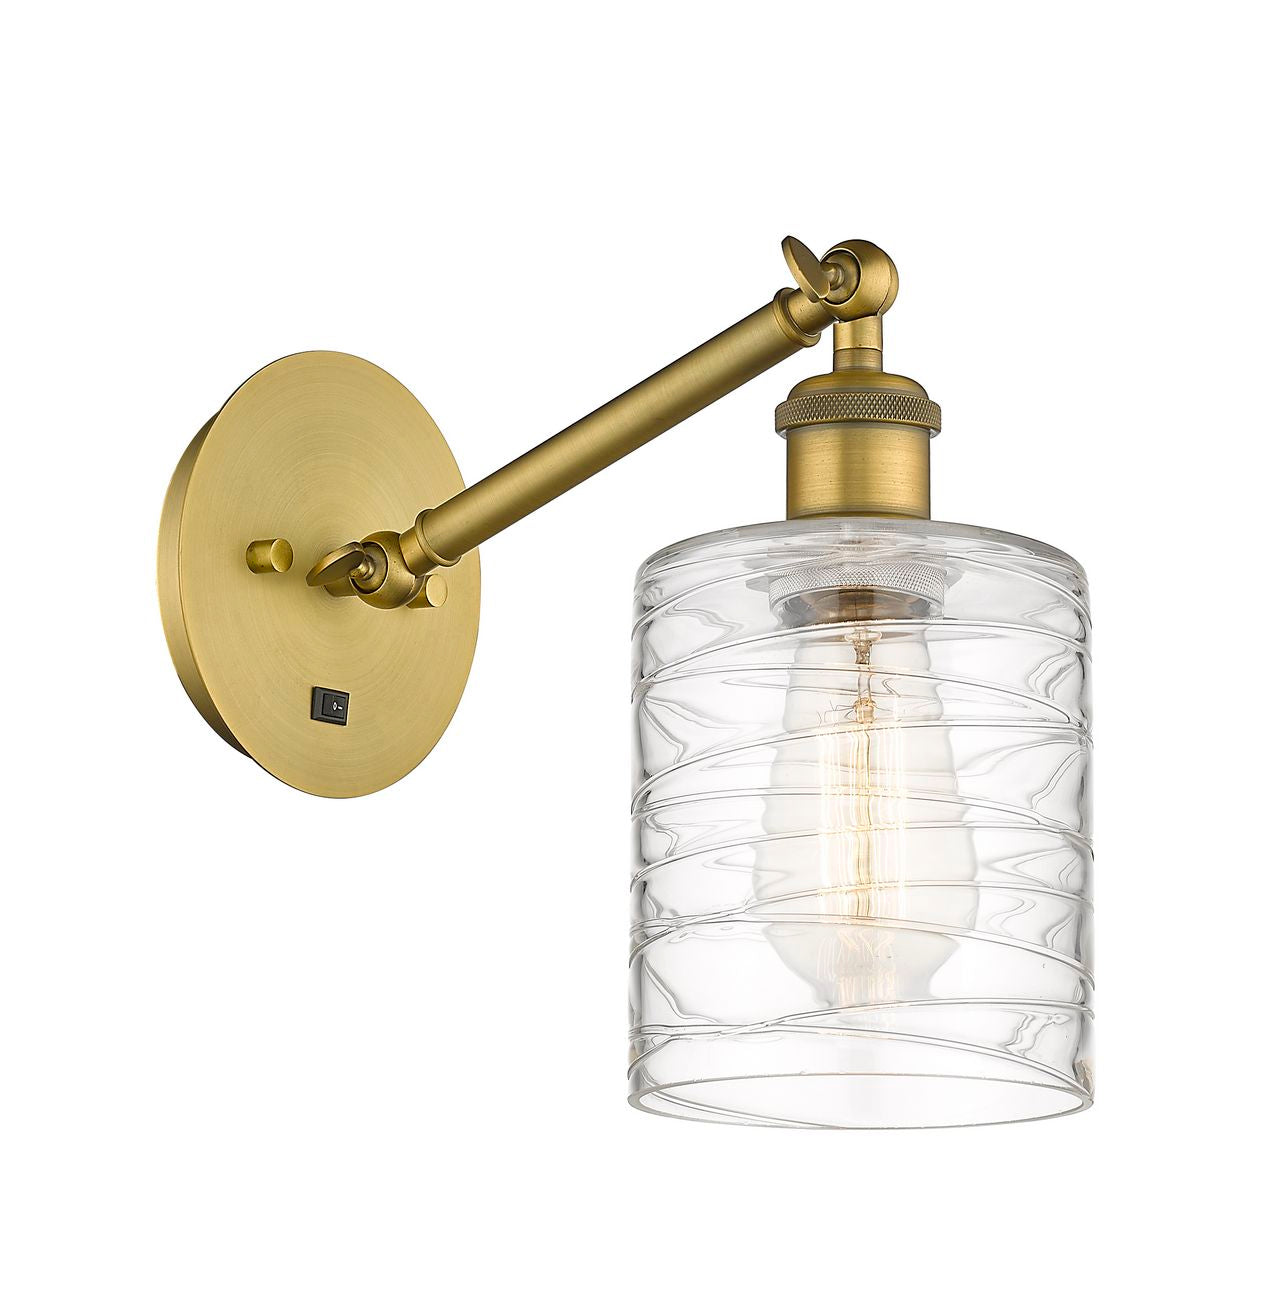 317-1W-BB-G1113 1-Light 5.3" Brushed Brass Sconce - Deco Swirl Cobbleskill Glass - LED Bulb - Dimmensions: 5.3 x 12.5 x 12.75 - Glass Up or Down: Yes